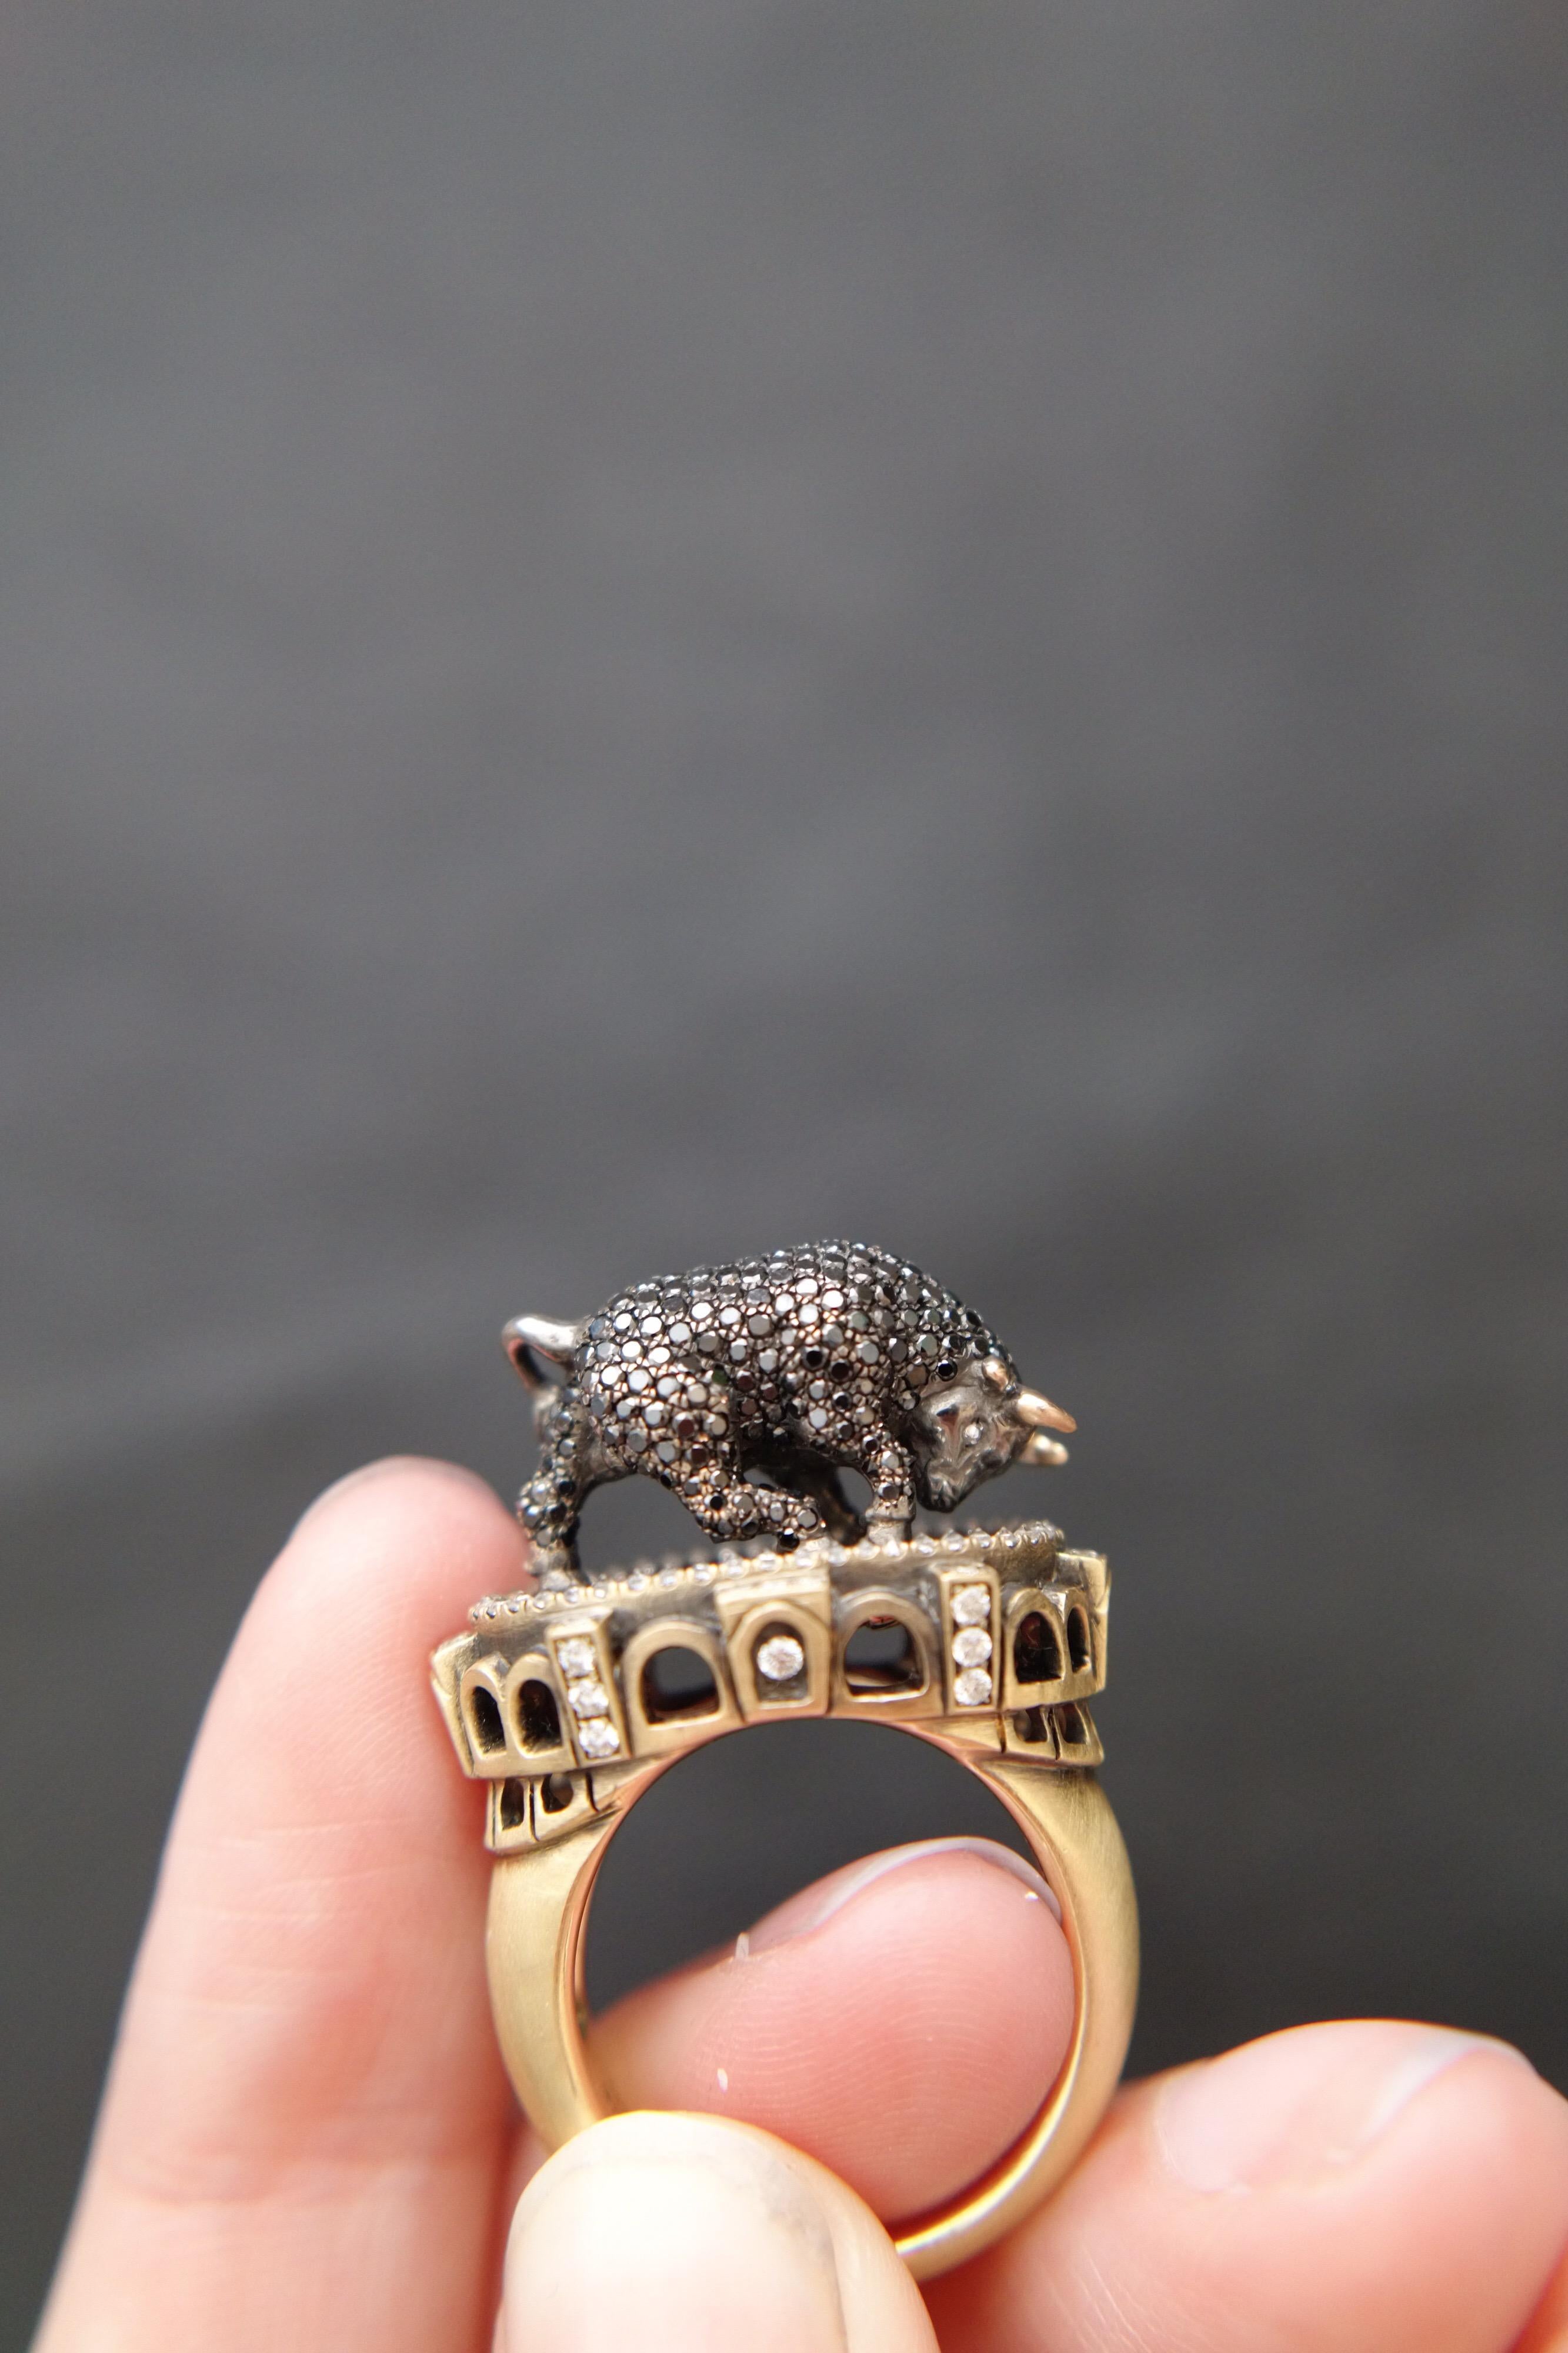 Women's or Men's Wendy Brandes 1.48 TCW Black Diamond Taurus Bull Ring With Surprise Inside For Sale